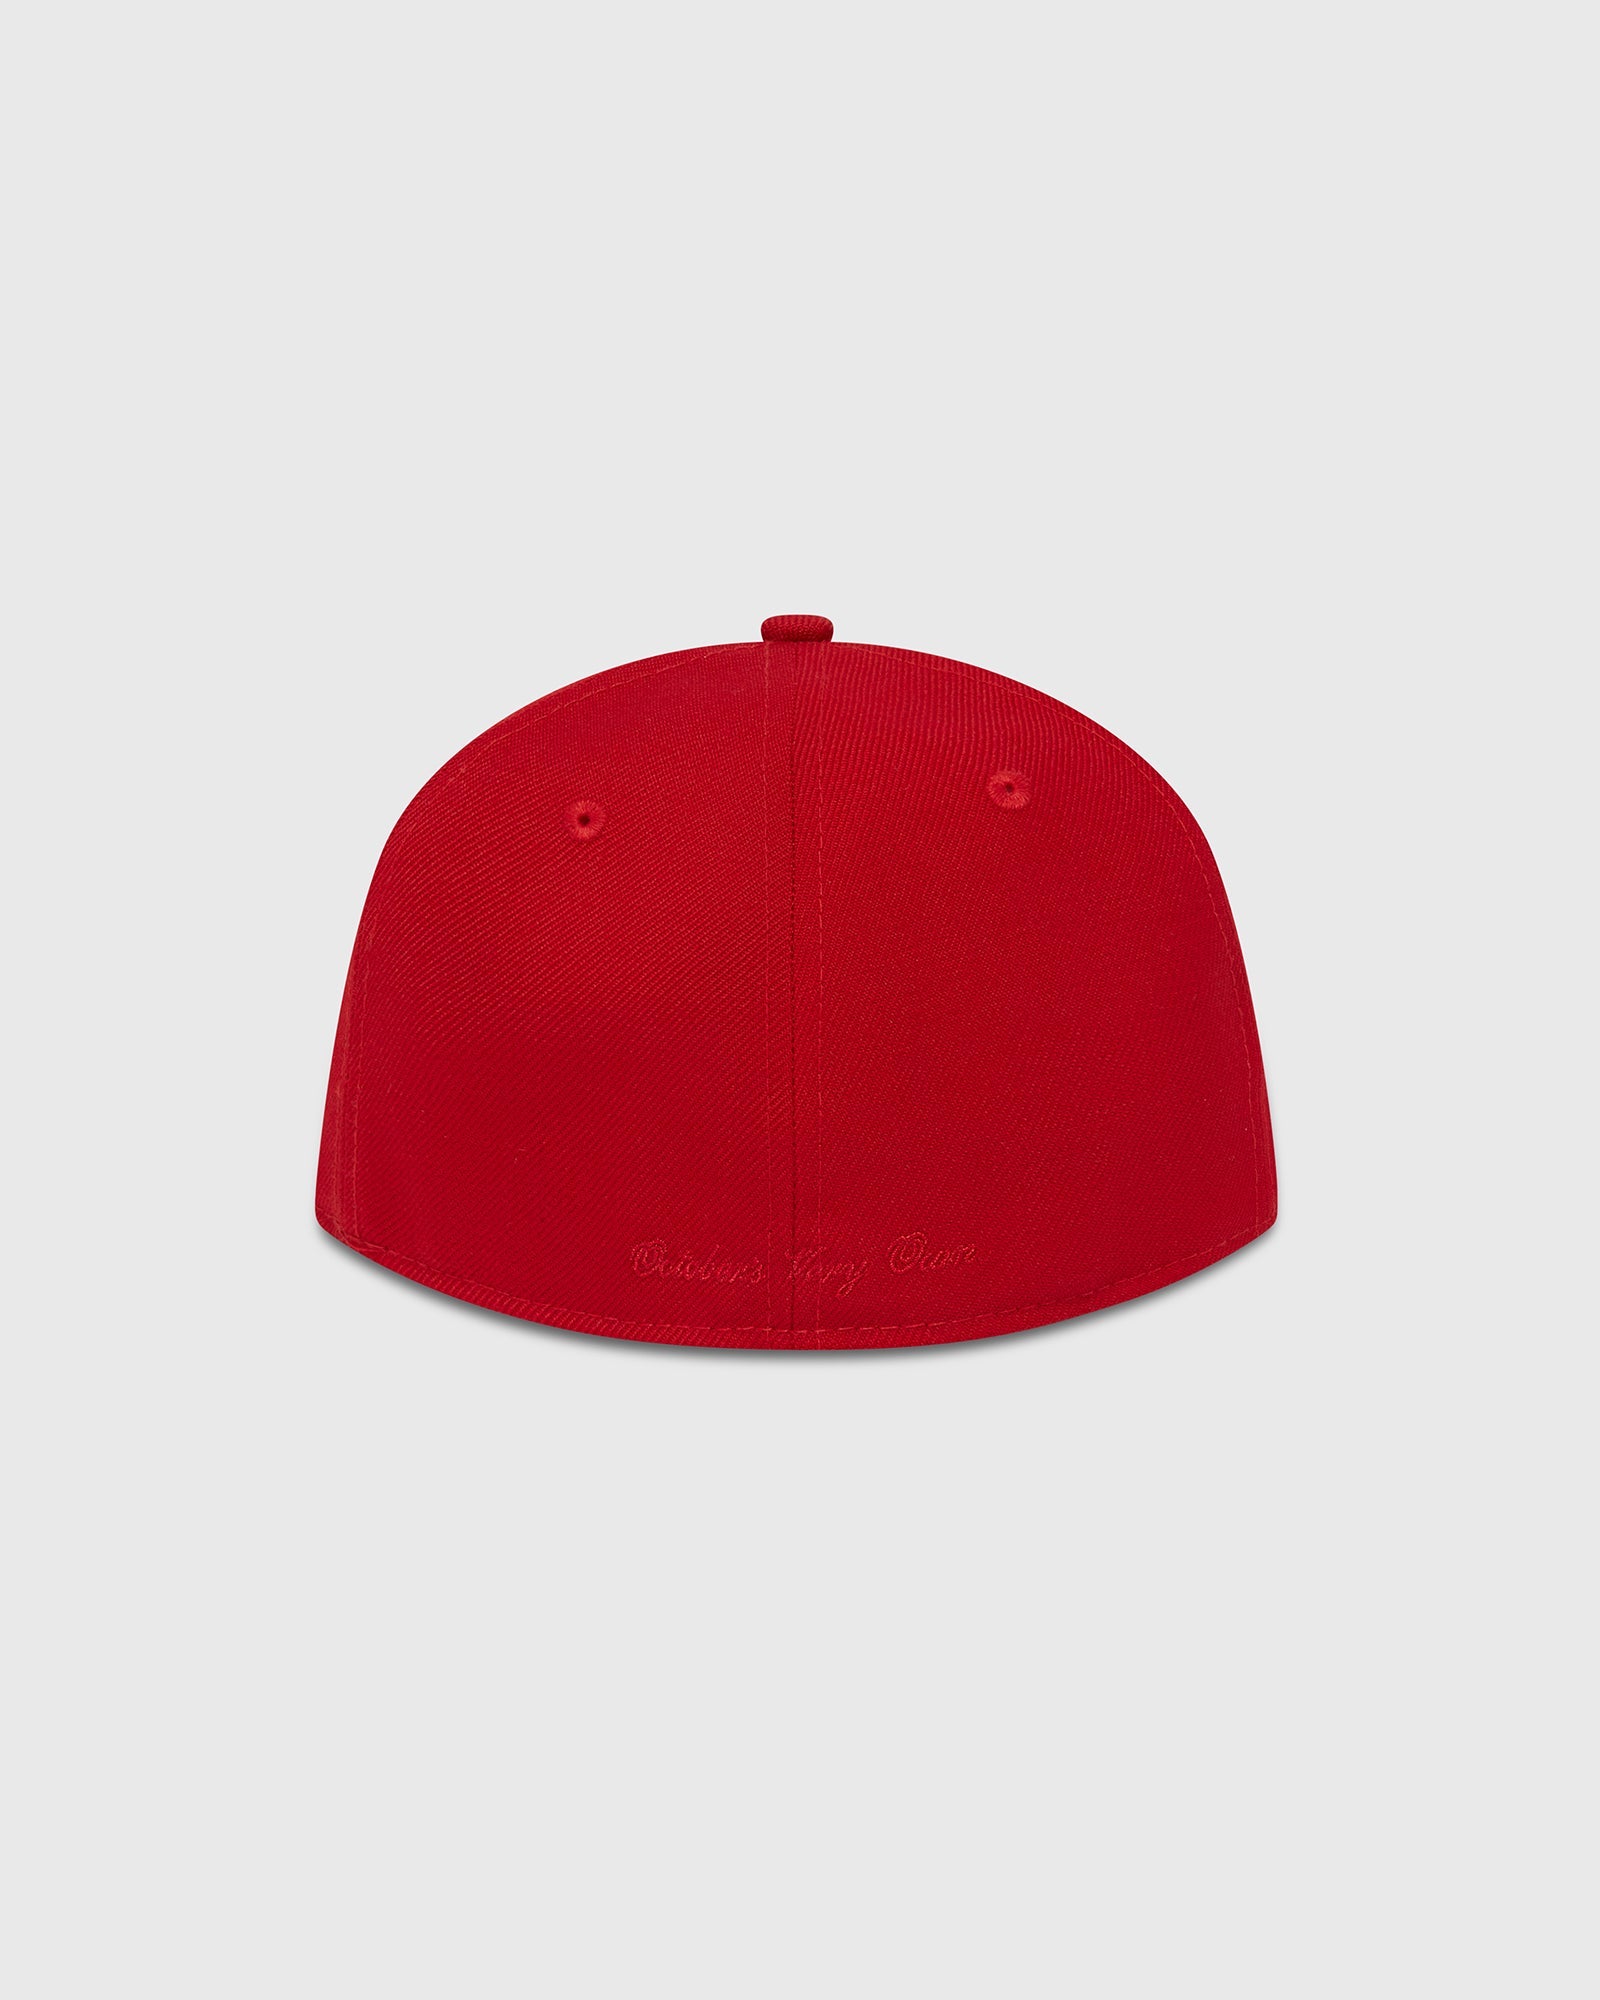 New Era 59Fifty OG Fitted Cap - Red